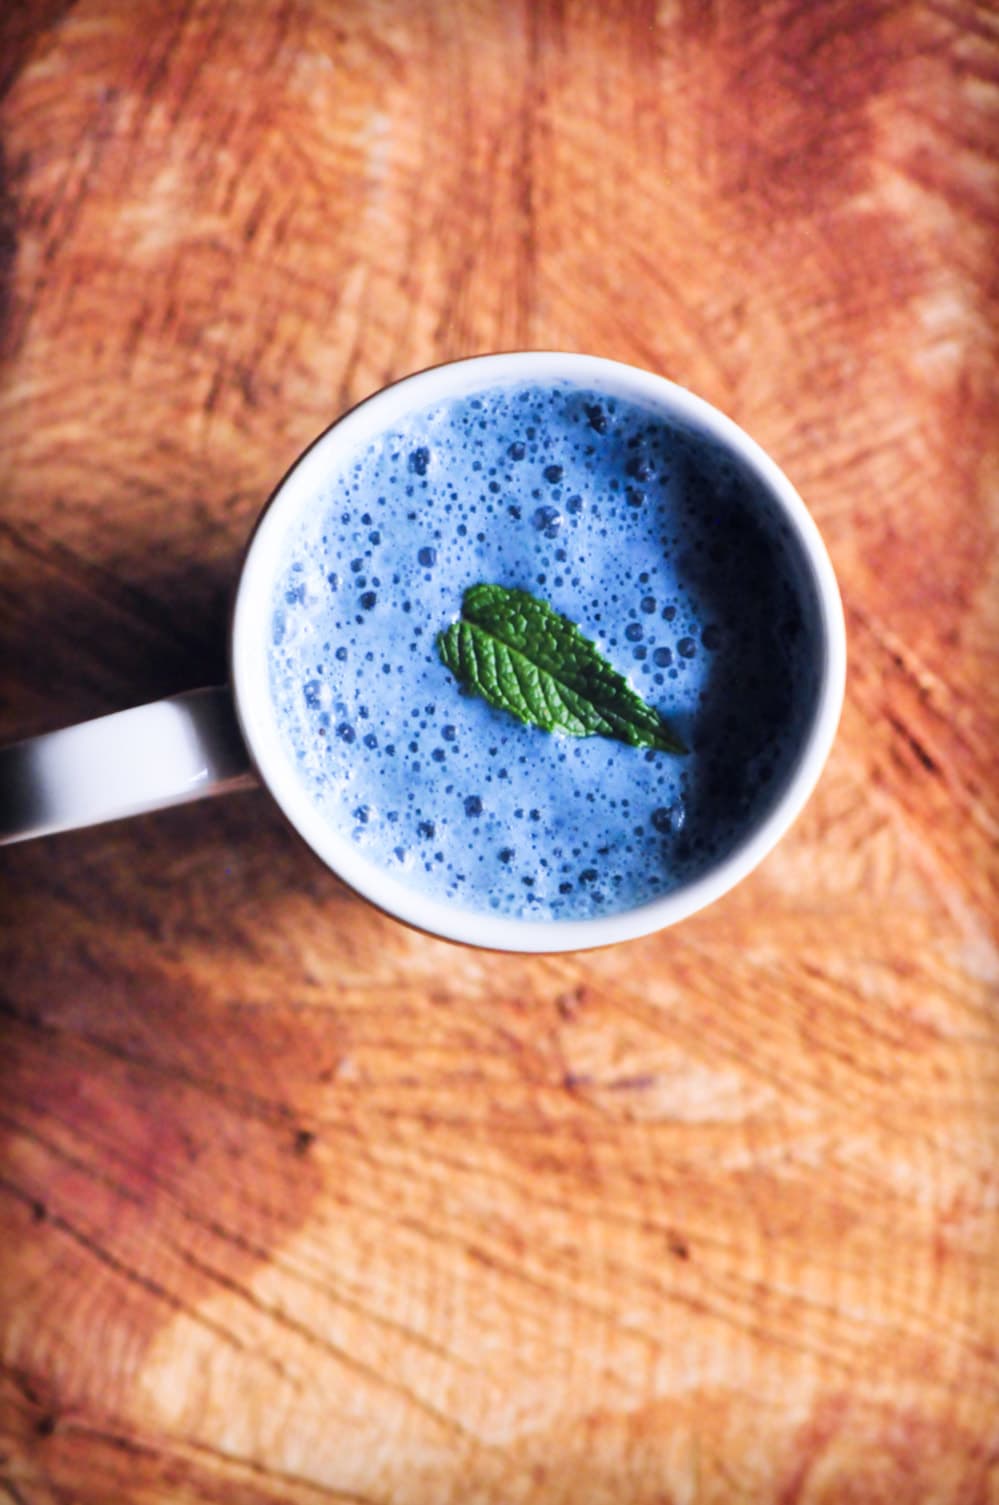  This gluten-free & vegan Double Blue Peppermint Moon Milk makes for one soothing & delicious antioxidant-rich brew perfect for those stressful days and sleepless nights . #moonmilk #bluemoonmilk #blueberrymoonmilk #peppermintmoonmilk #sleepelixir #ayurveda #lechedeluna #bluebutterflypeapowder 